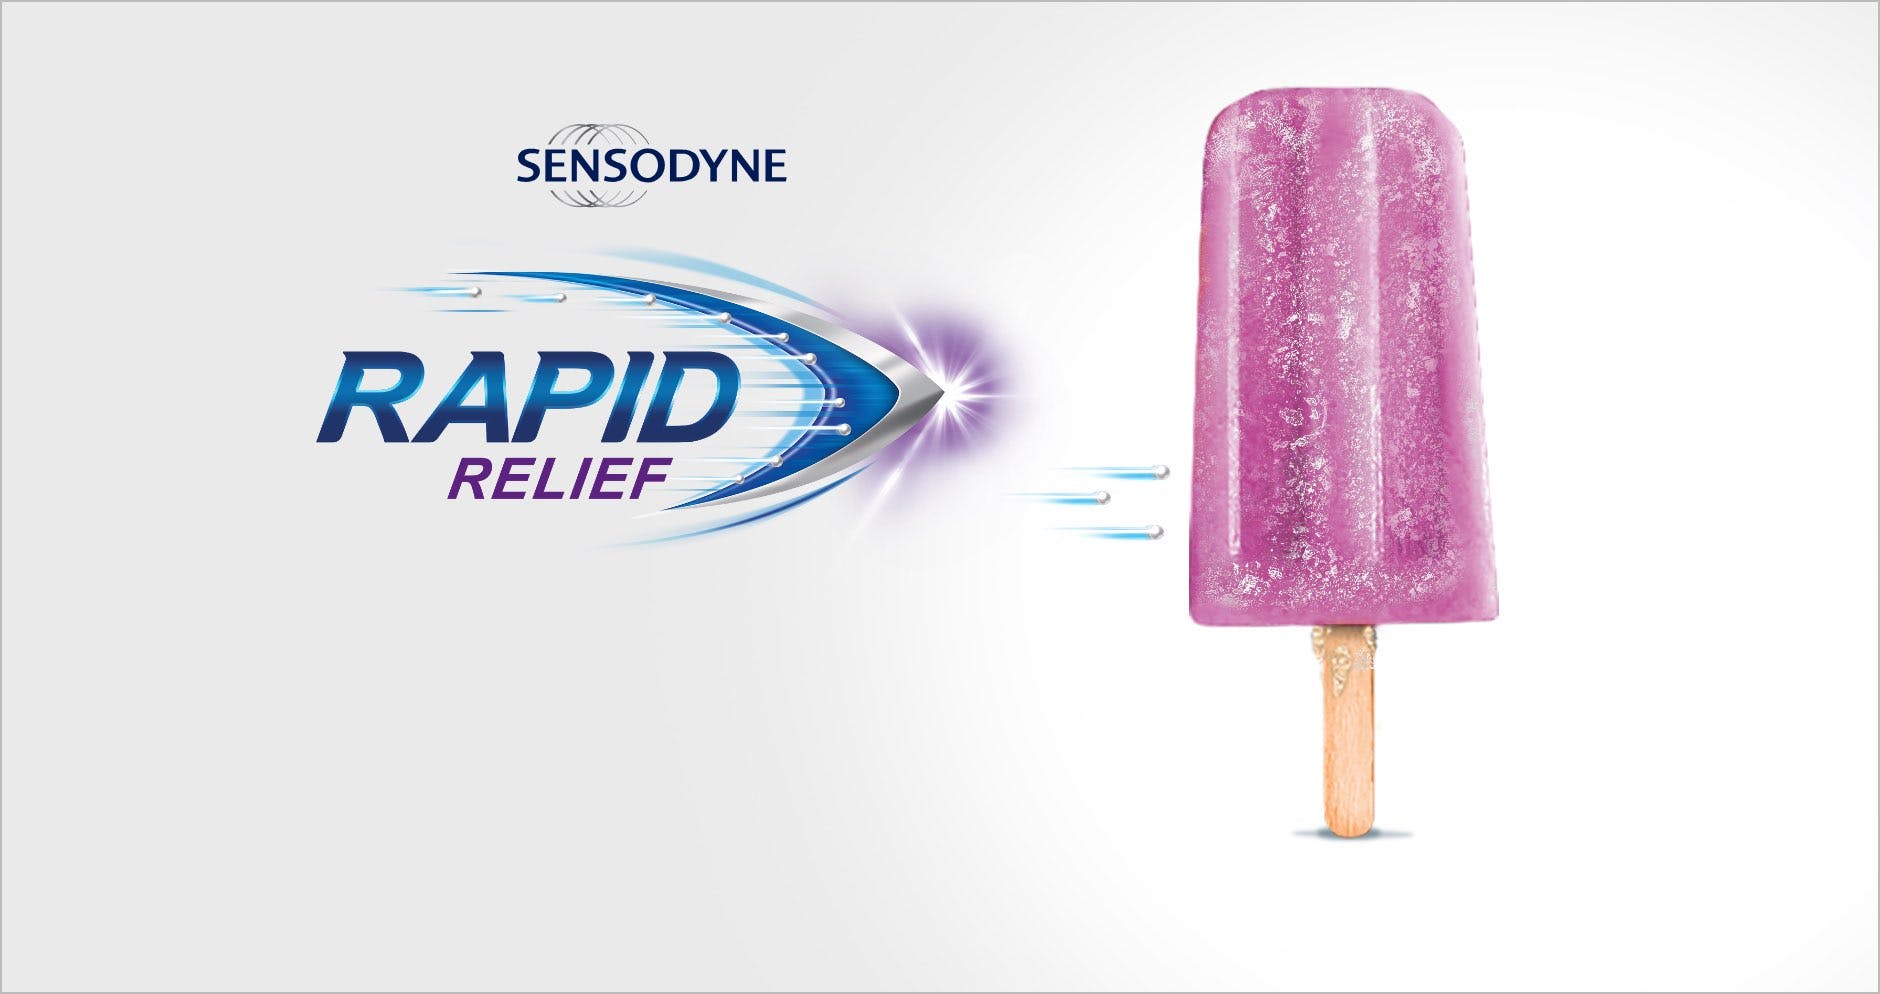 Relief from cold sensitivity in 60 seconds